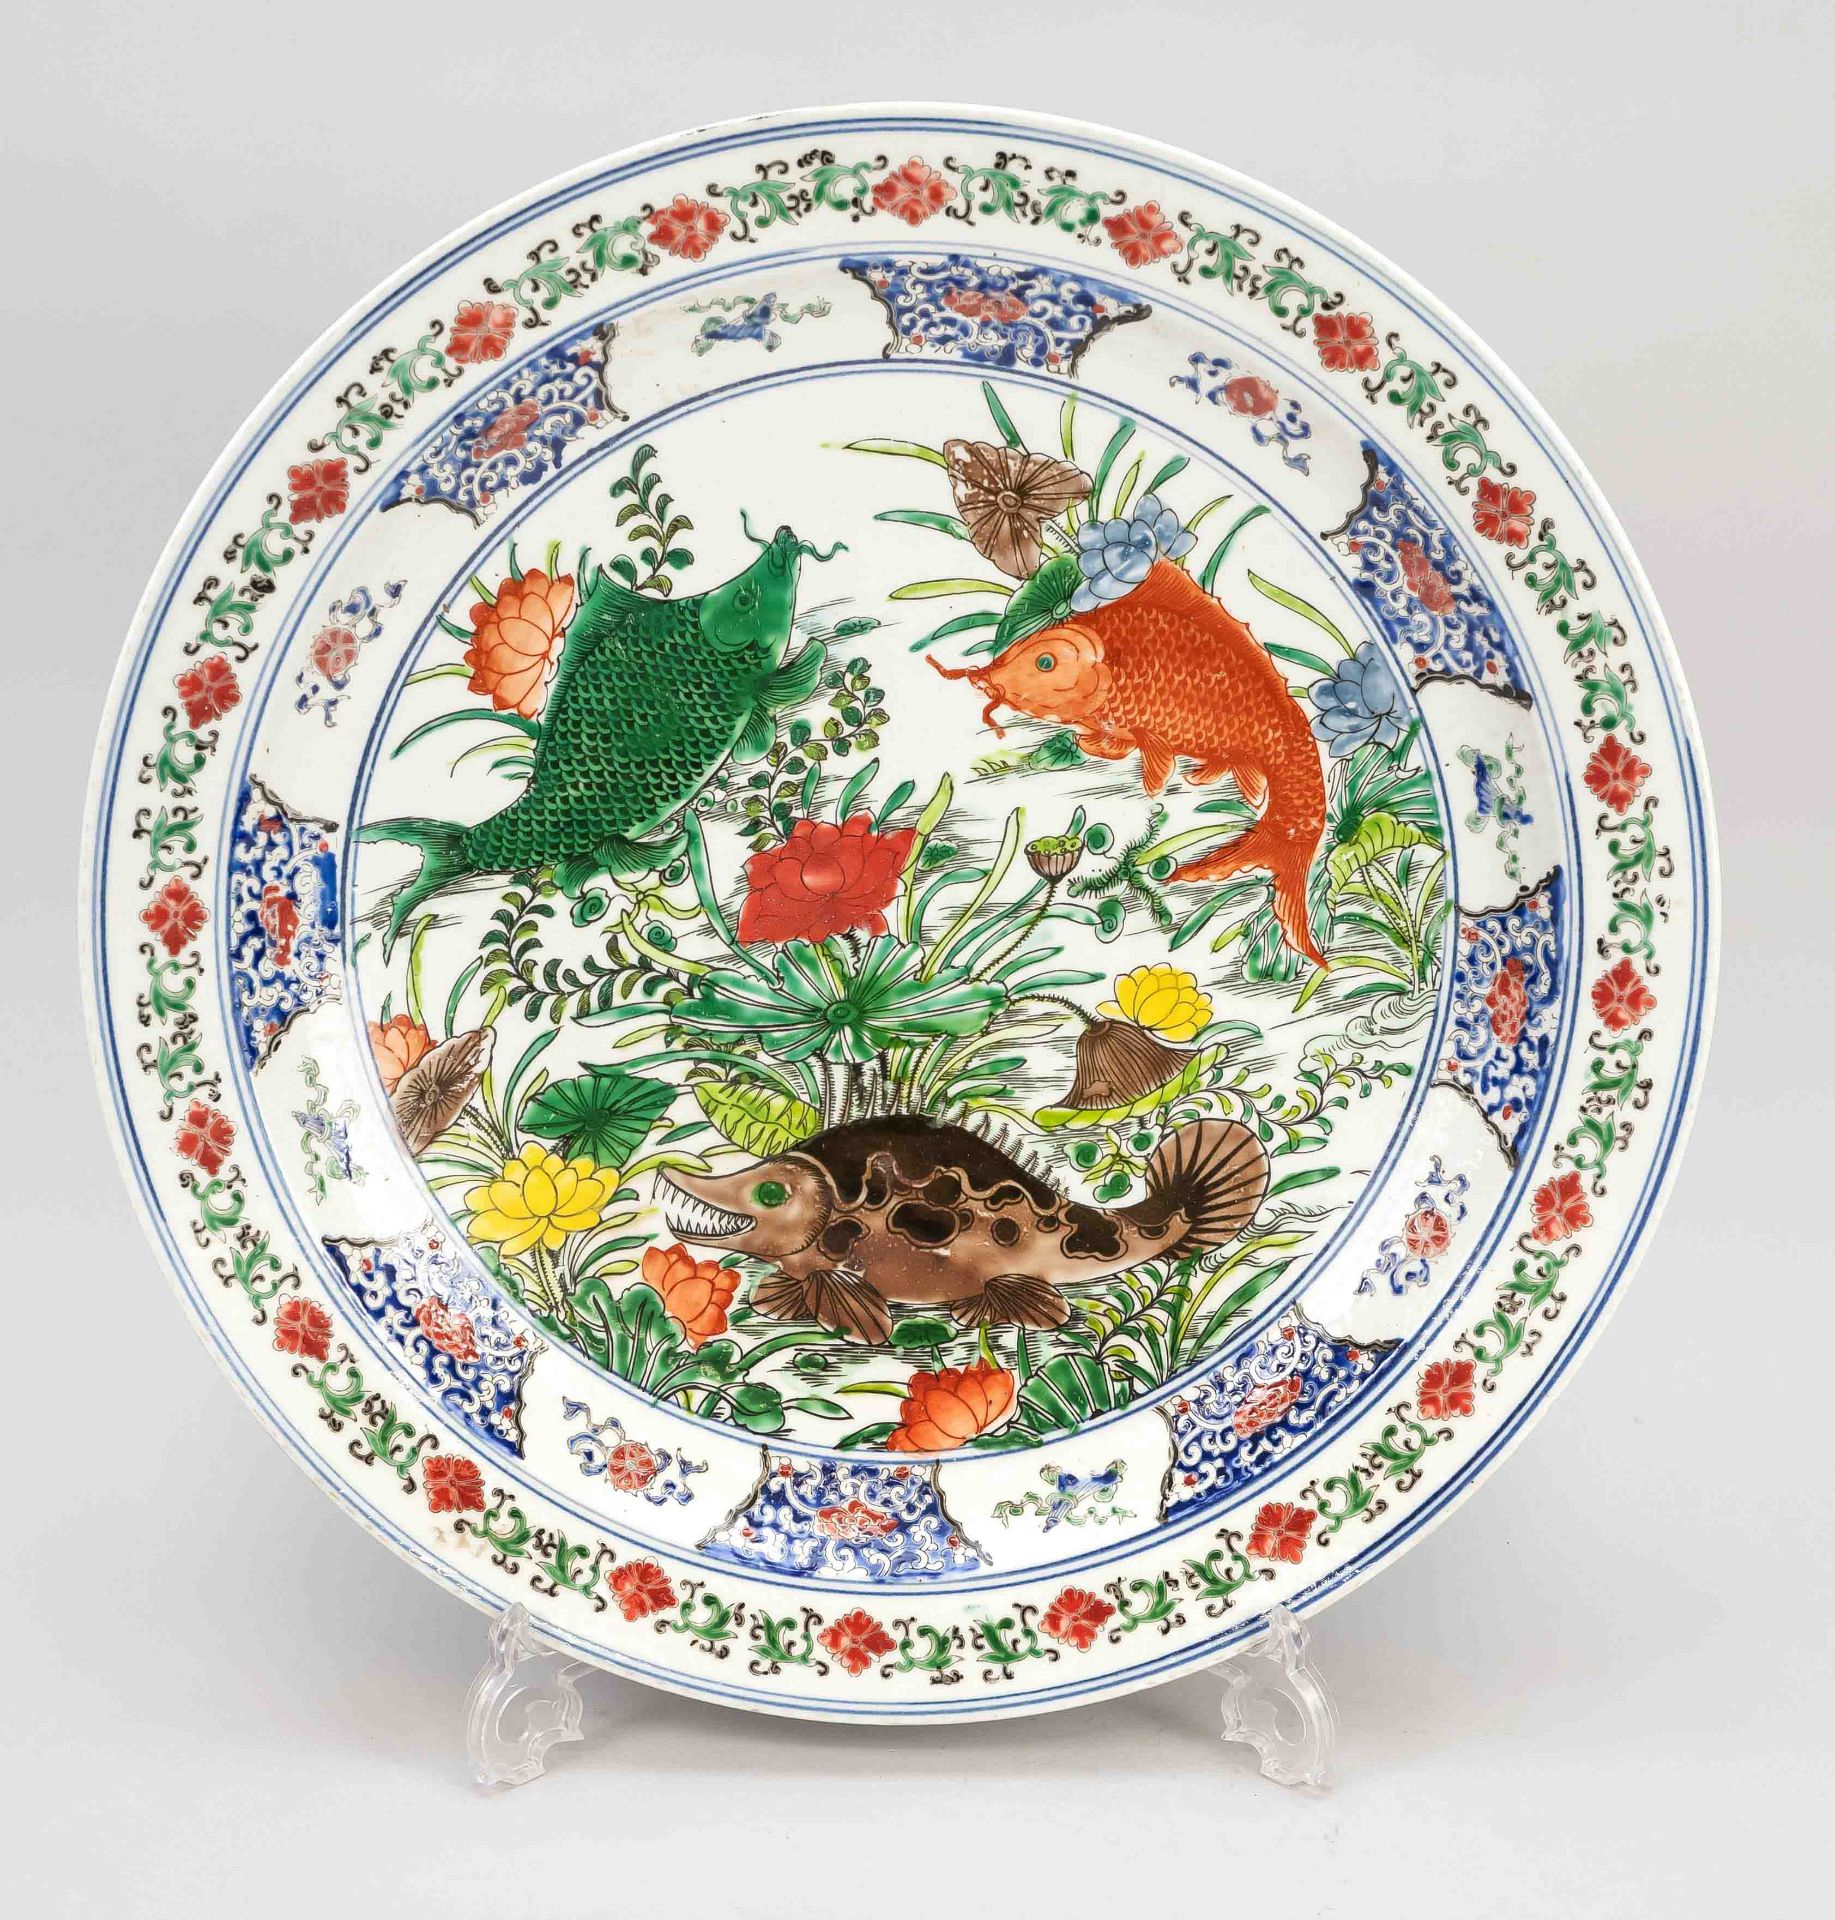 Very large fish plate famille verte, China, probably republic period(1912-1949), porcelain with